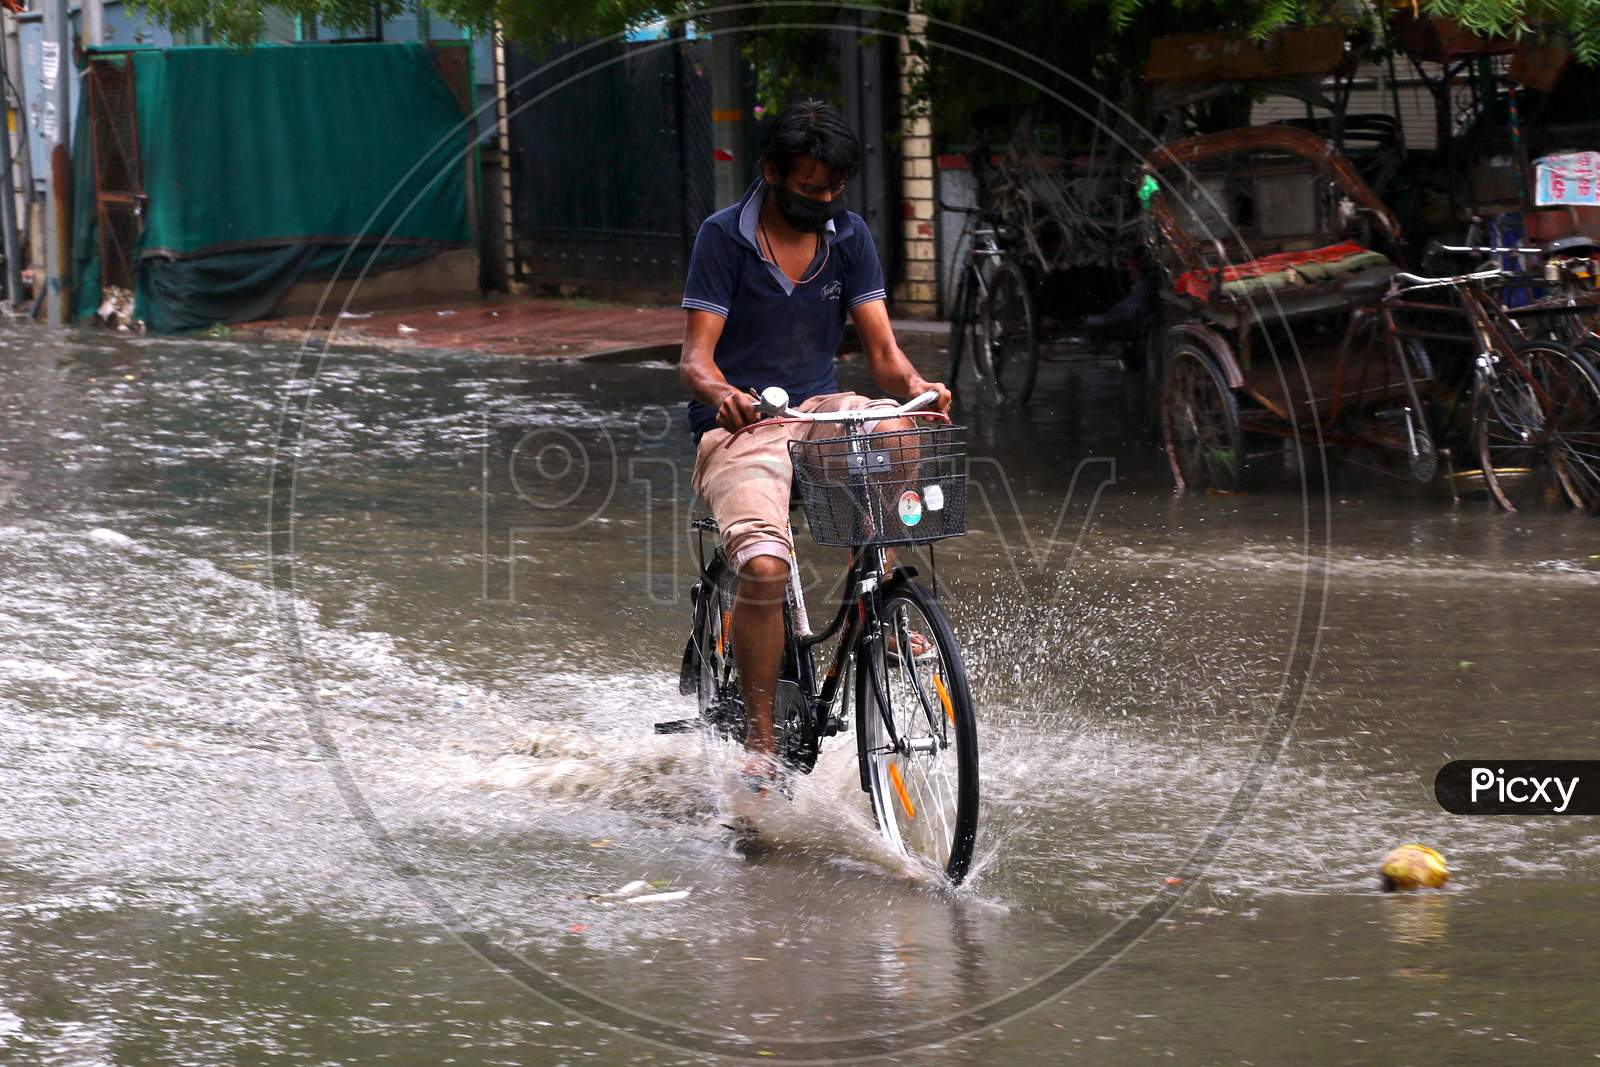 A Bicycle  Rider On A Waterlogged Road During Rain, In Ajmer, Rajasthan, India On 04 June 2020.